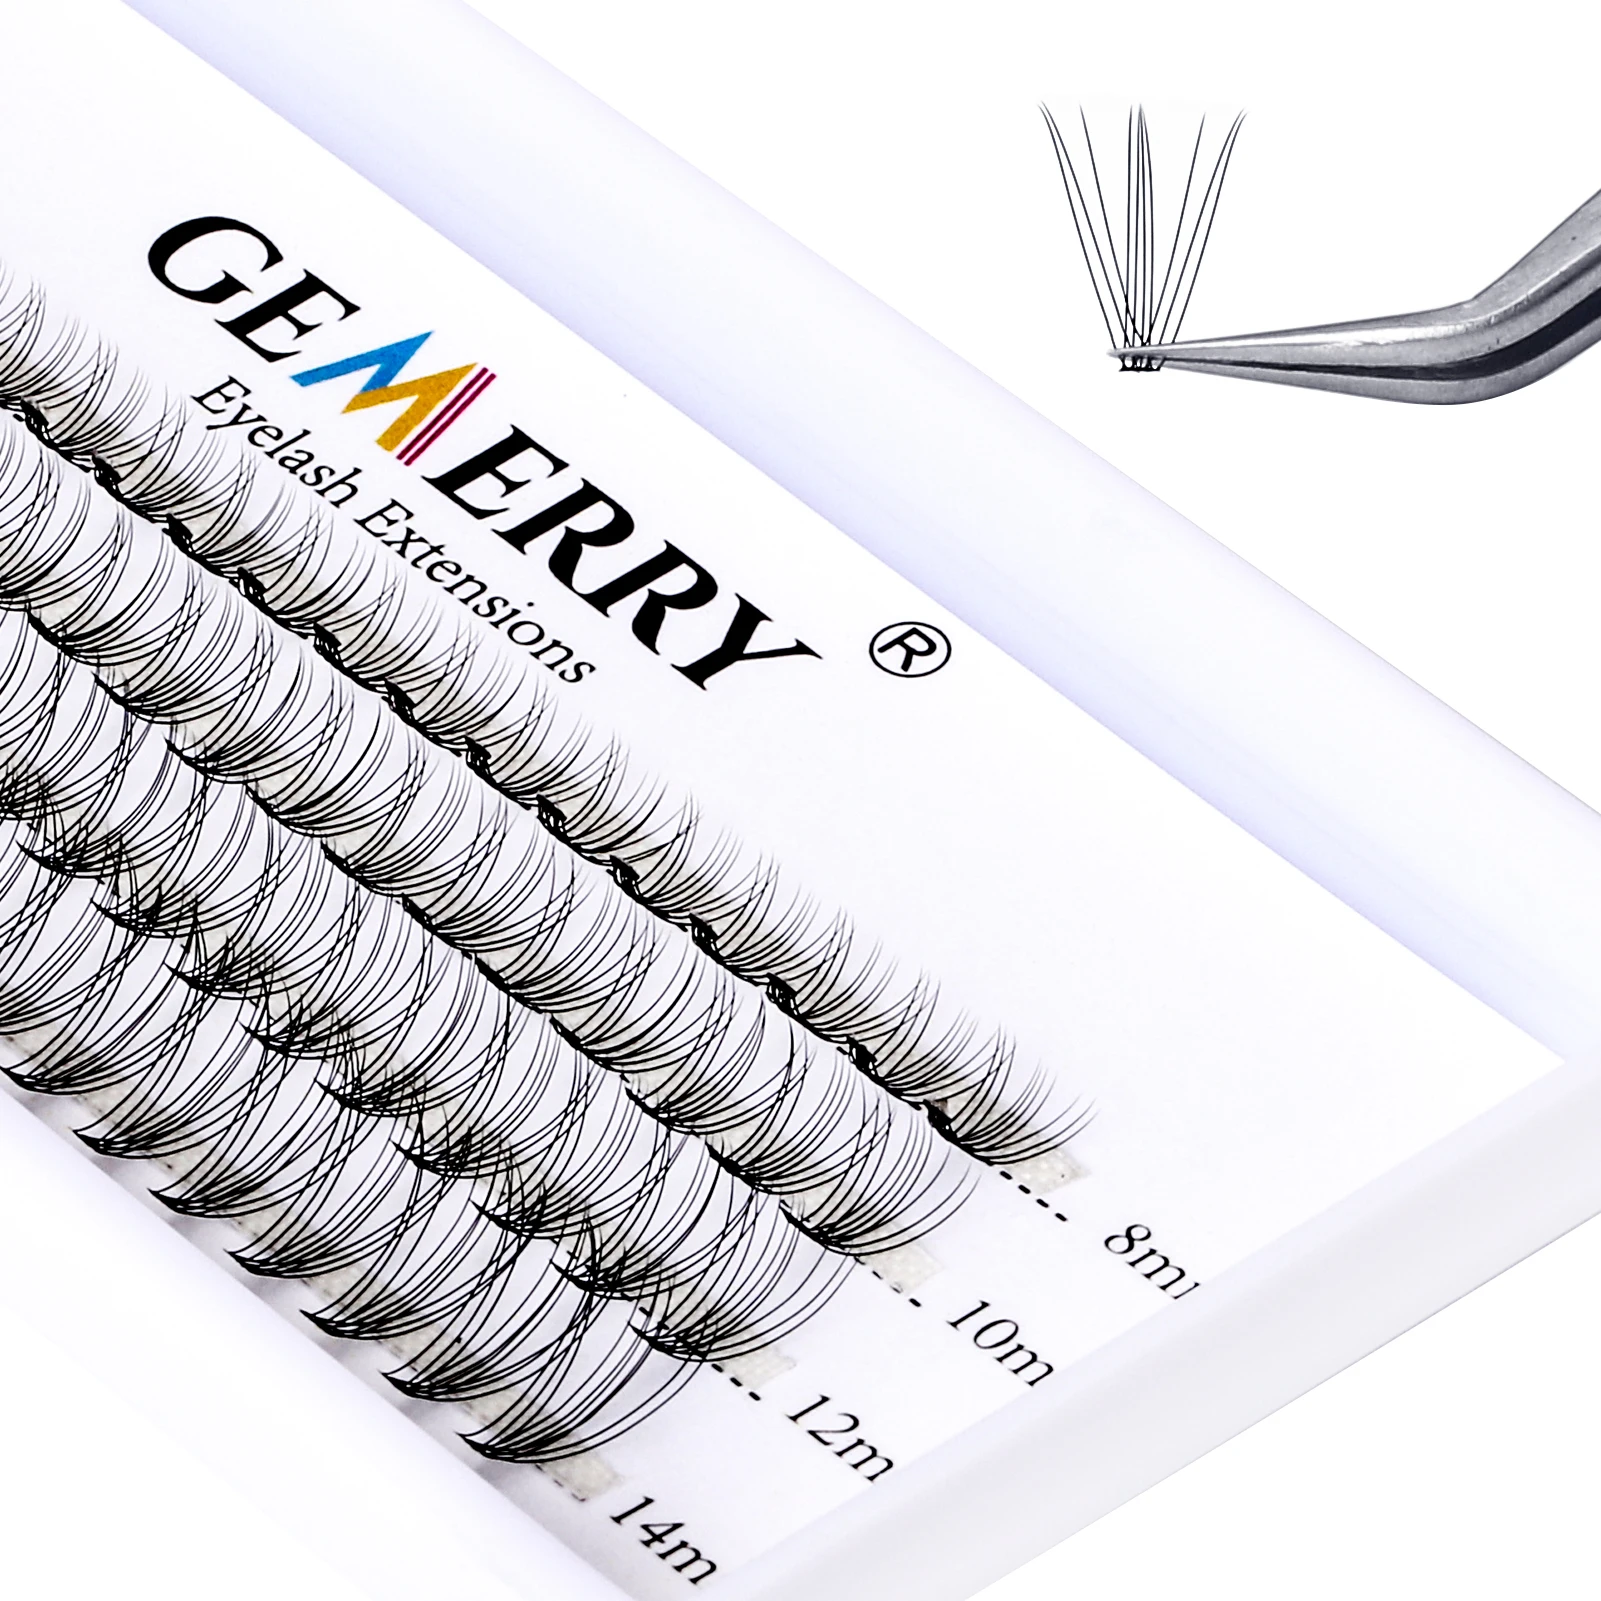 Gemerry 80 Bundles Cluster Eyelash Extension 10/20/30/40D Premade Fan Lashes Russian Volume Eyelashes Thick Mink Strip Lashes